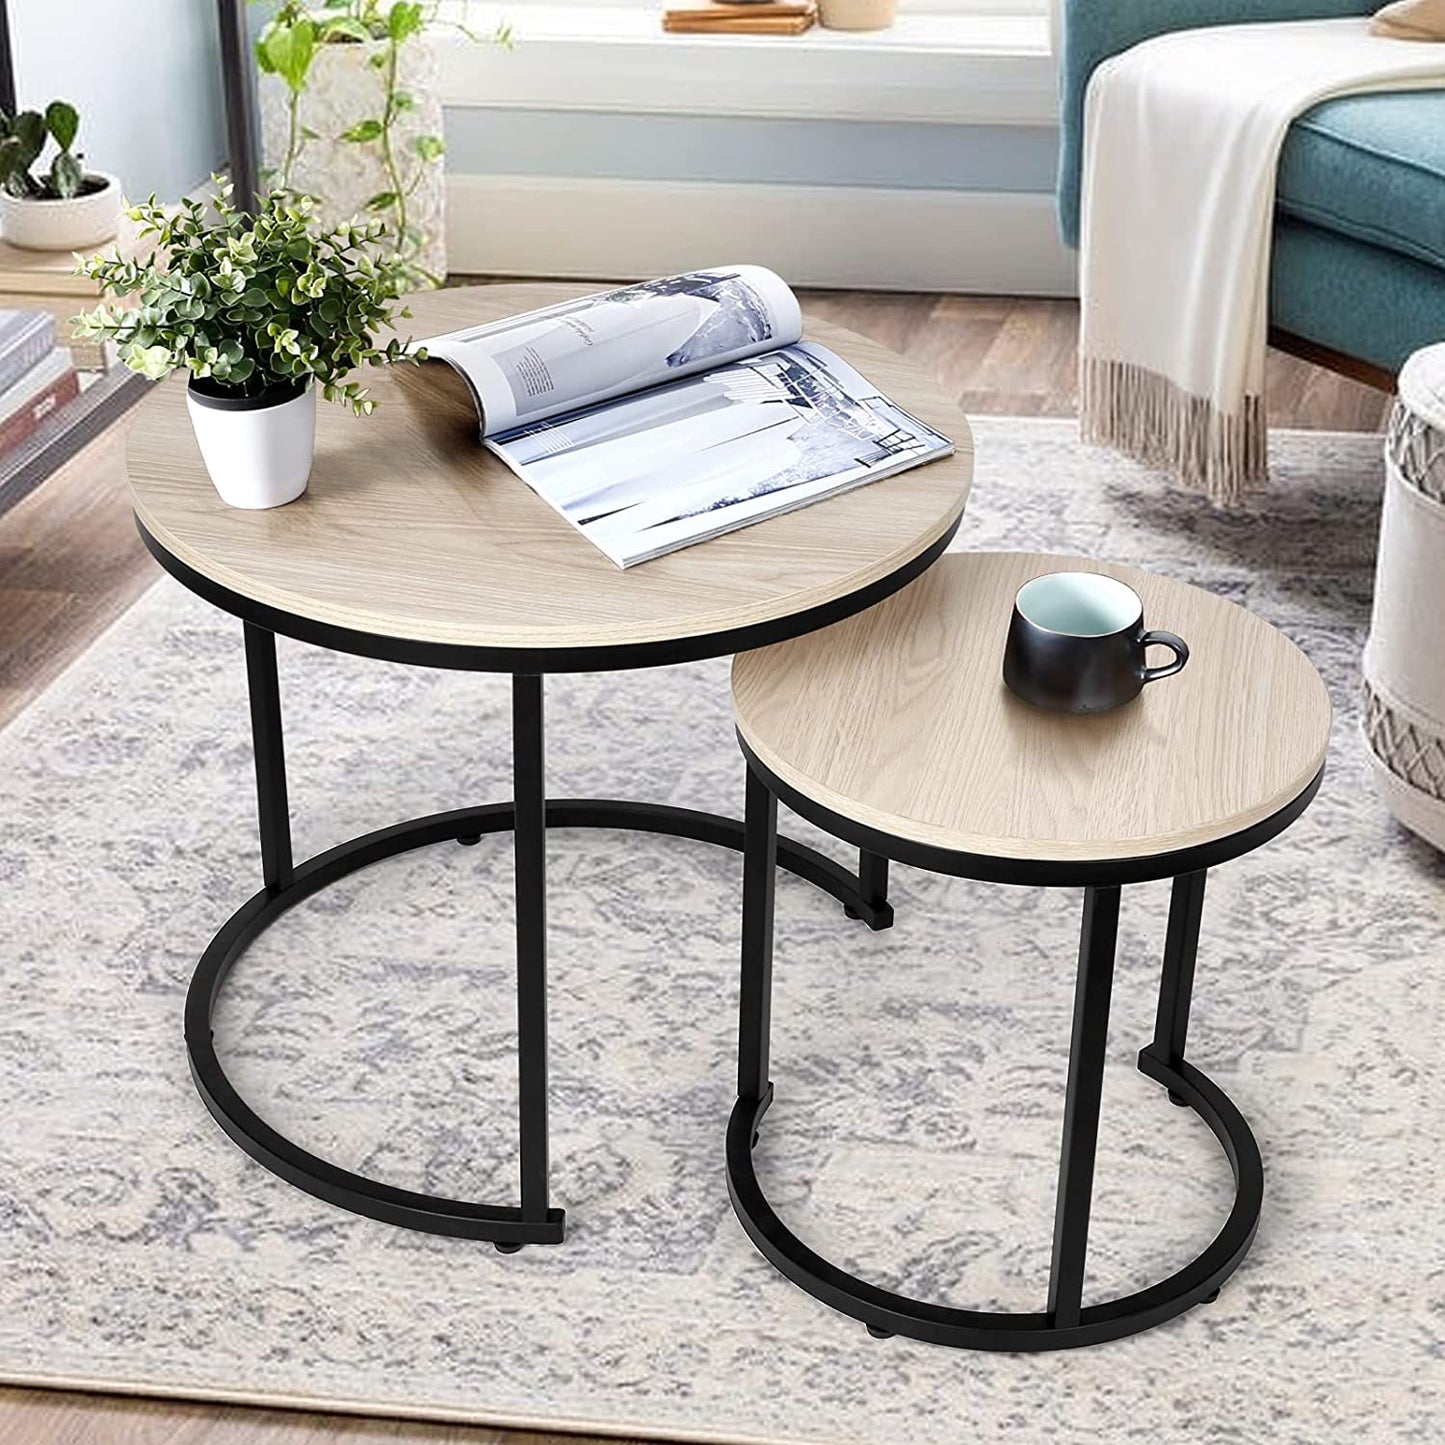 Nest Of Tables: Set of 2 for Living Room, Balcony, Garden, Round Table with Wood Side, Sturdy Metal Frame